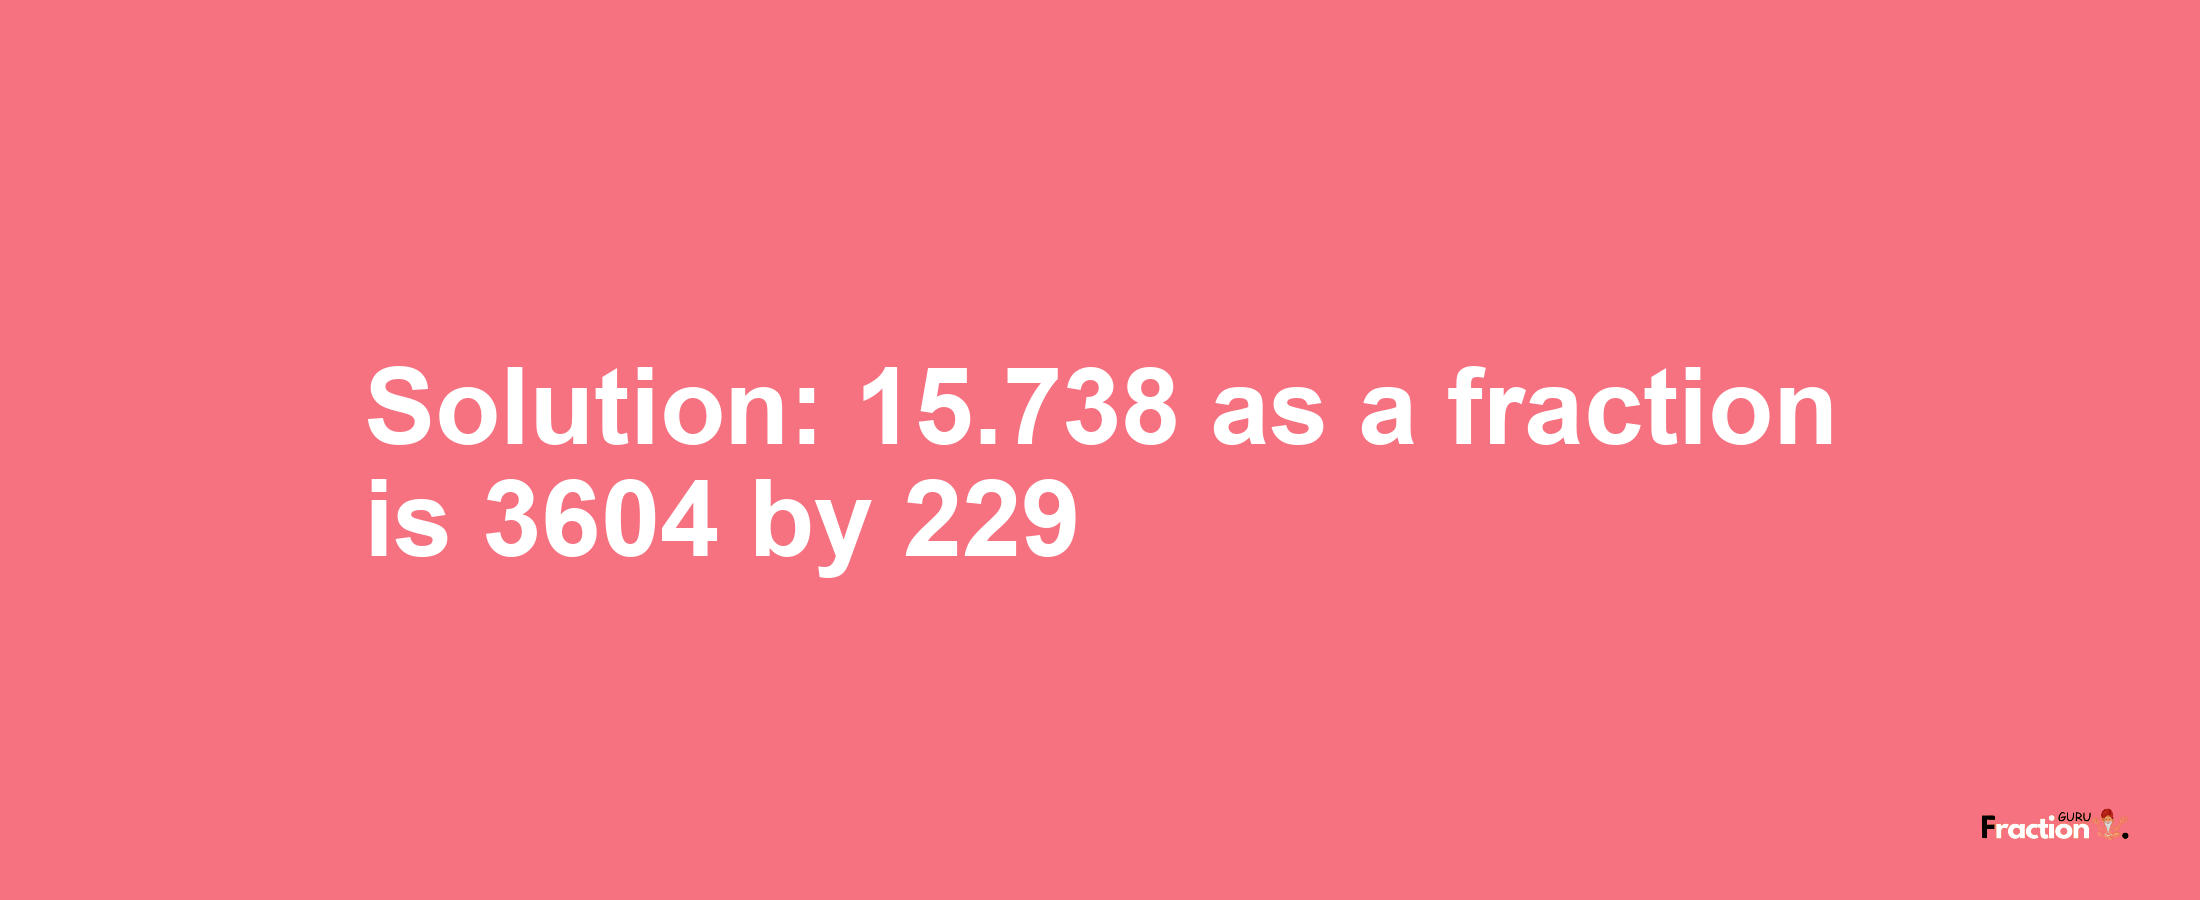 Solution:15.738 as a fraction is 3604/229